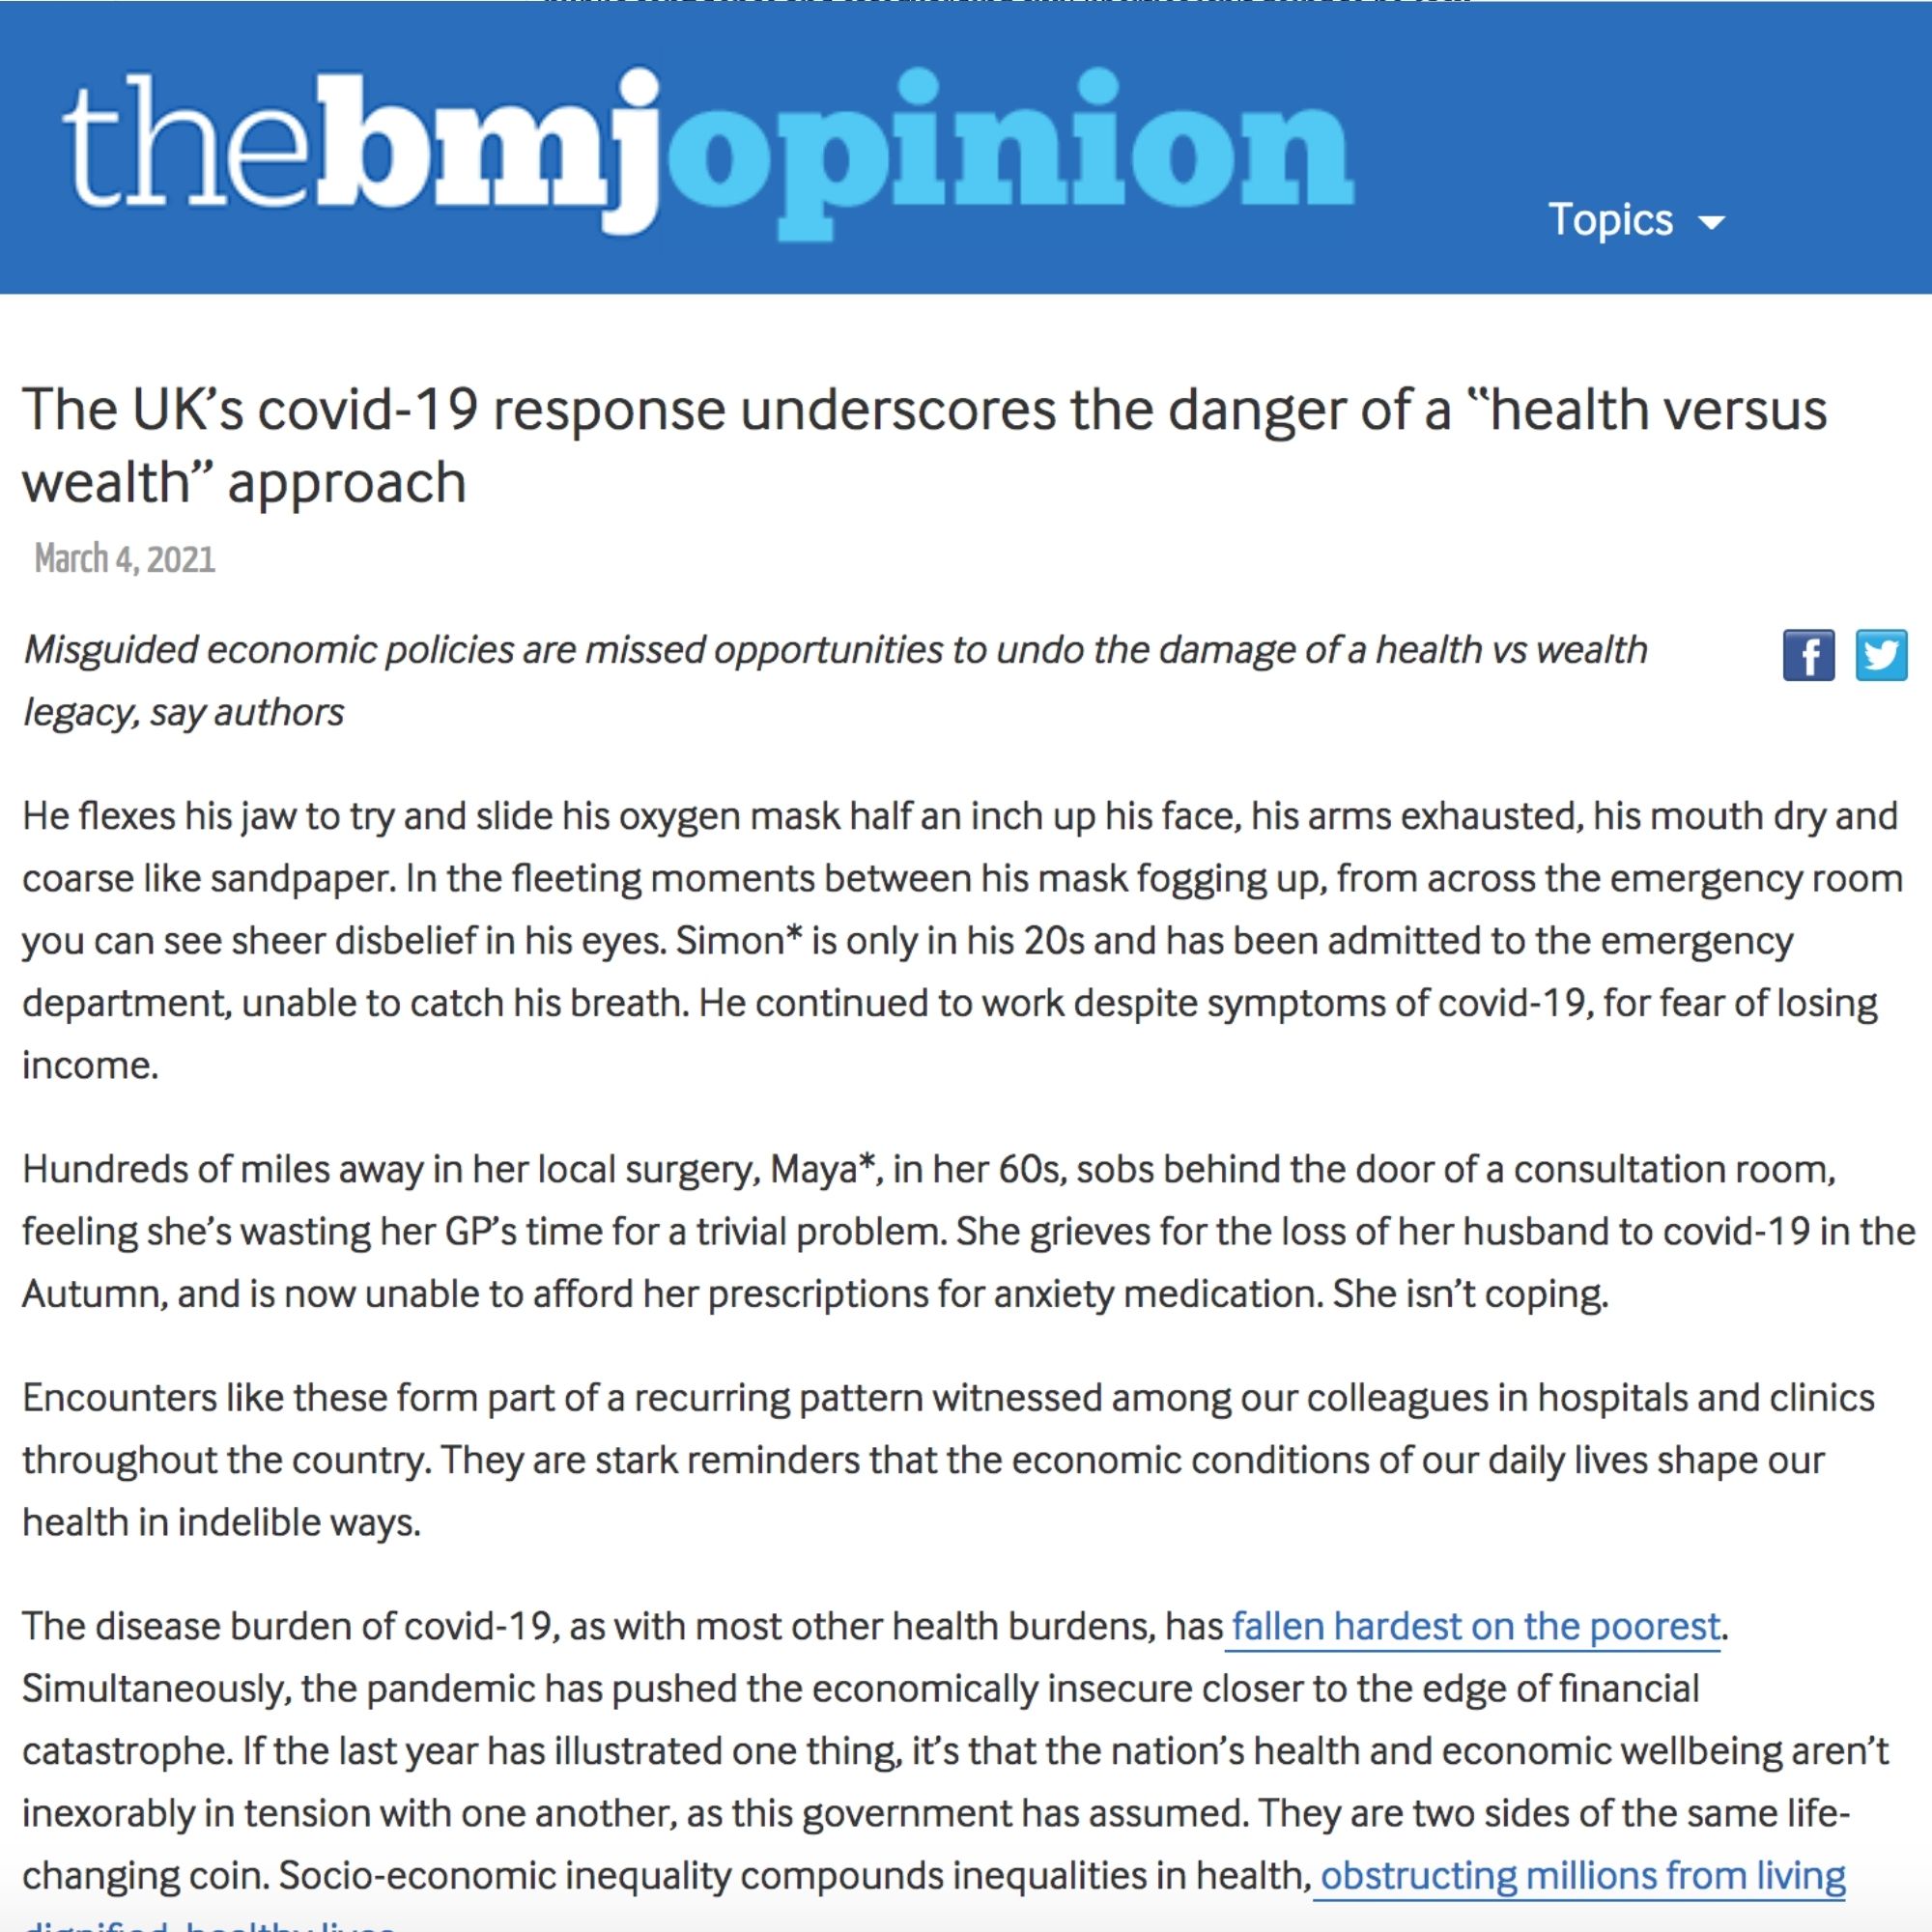 The UK’s covid-19 response underscores the danger of a “health versus wealth” approach